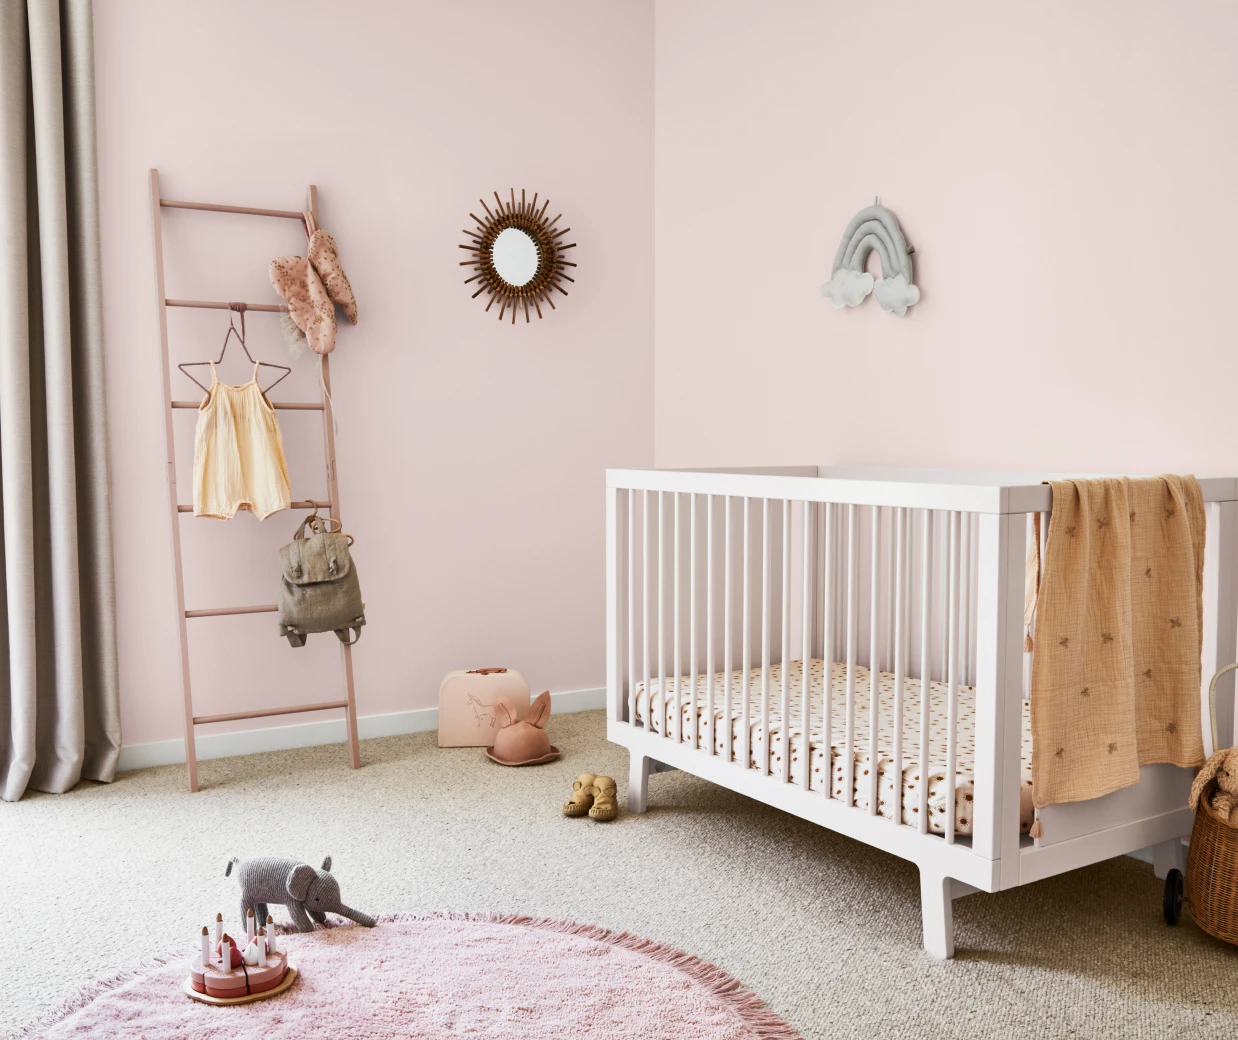 Create Your Dream Nursery With Our Diy Painting Guide | Dulux